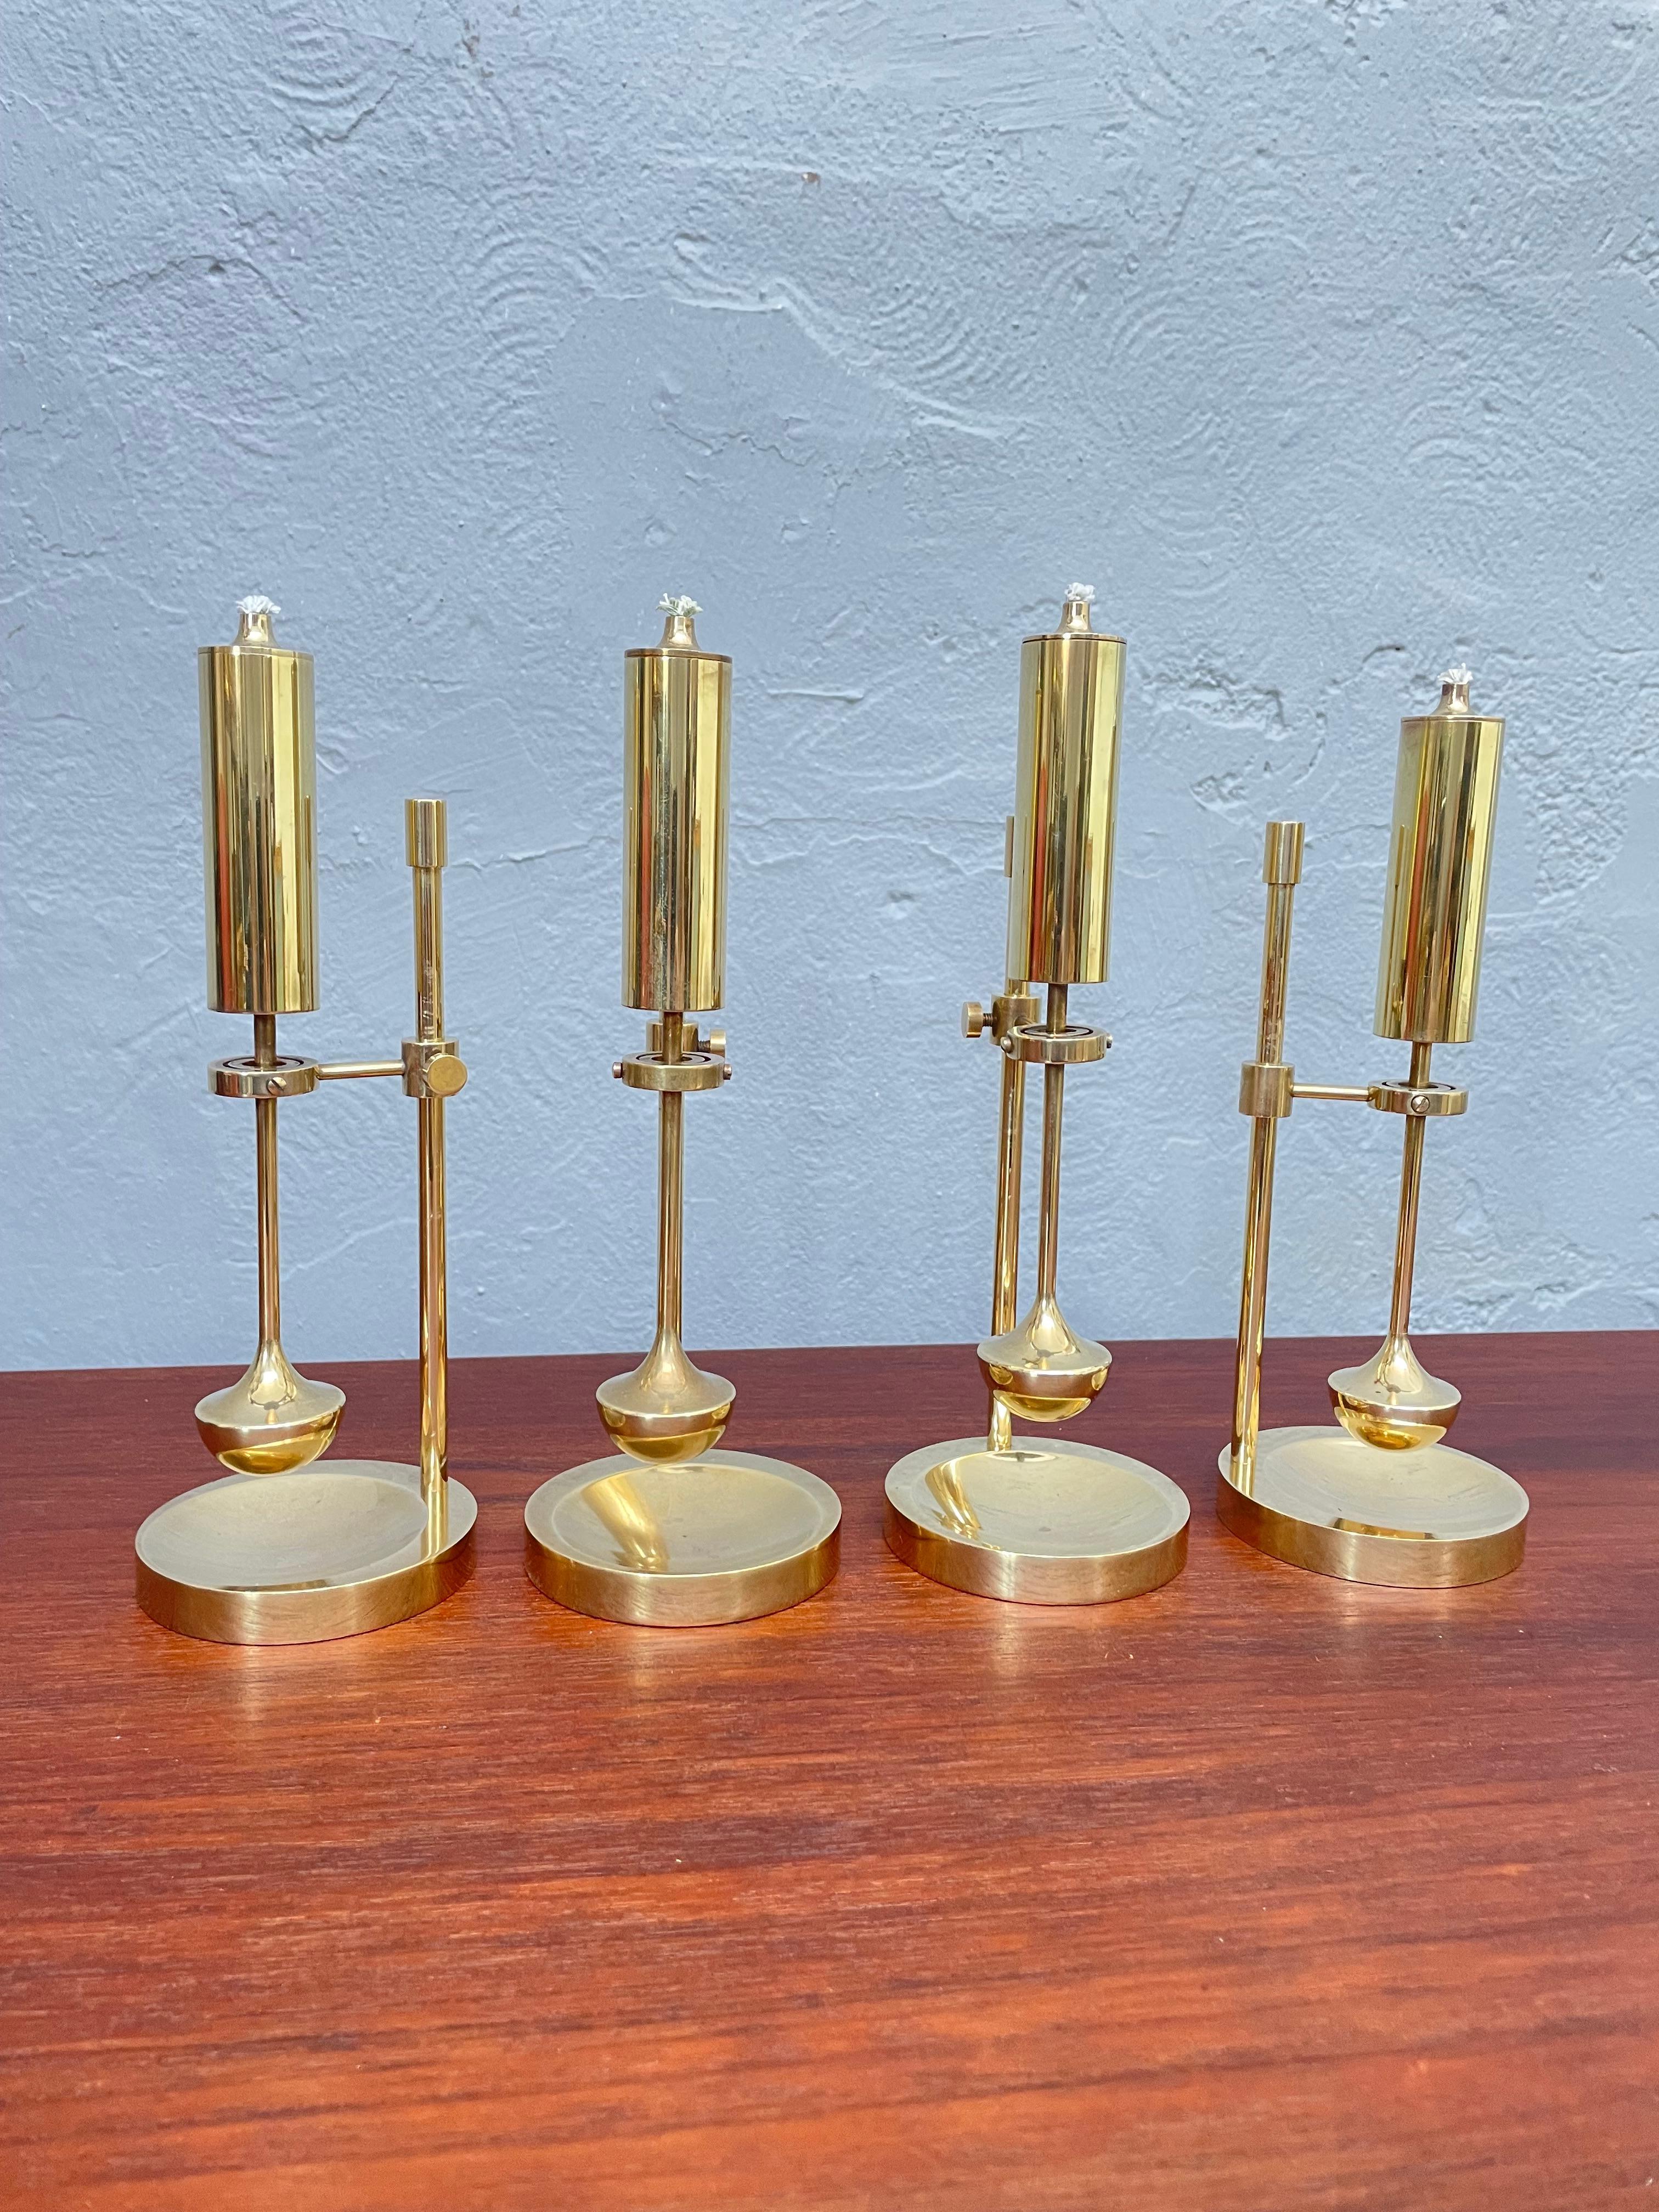 Vintage midcentury solid brass oil lamp by Ilse Ammonsen for Daproma of Denmark in brass.
Stamped on the base.
No major issues or dents Just age related wear and patina to the surface.
Extra wick will be included.
Runs on normal lamp oil.
Will be